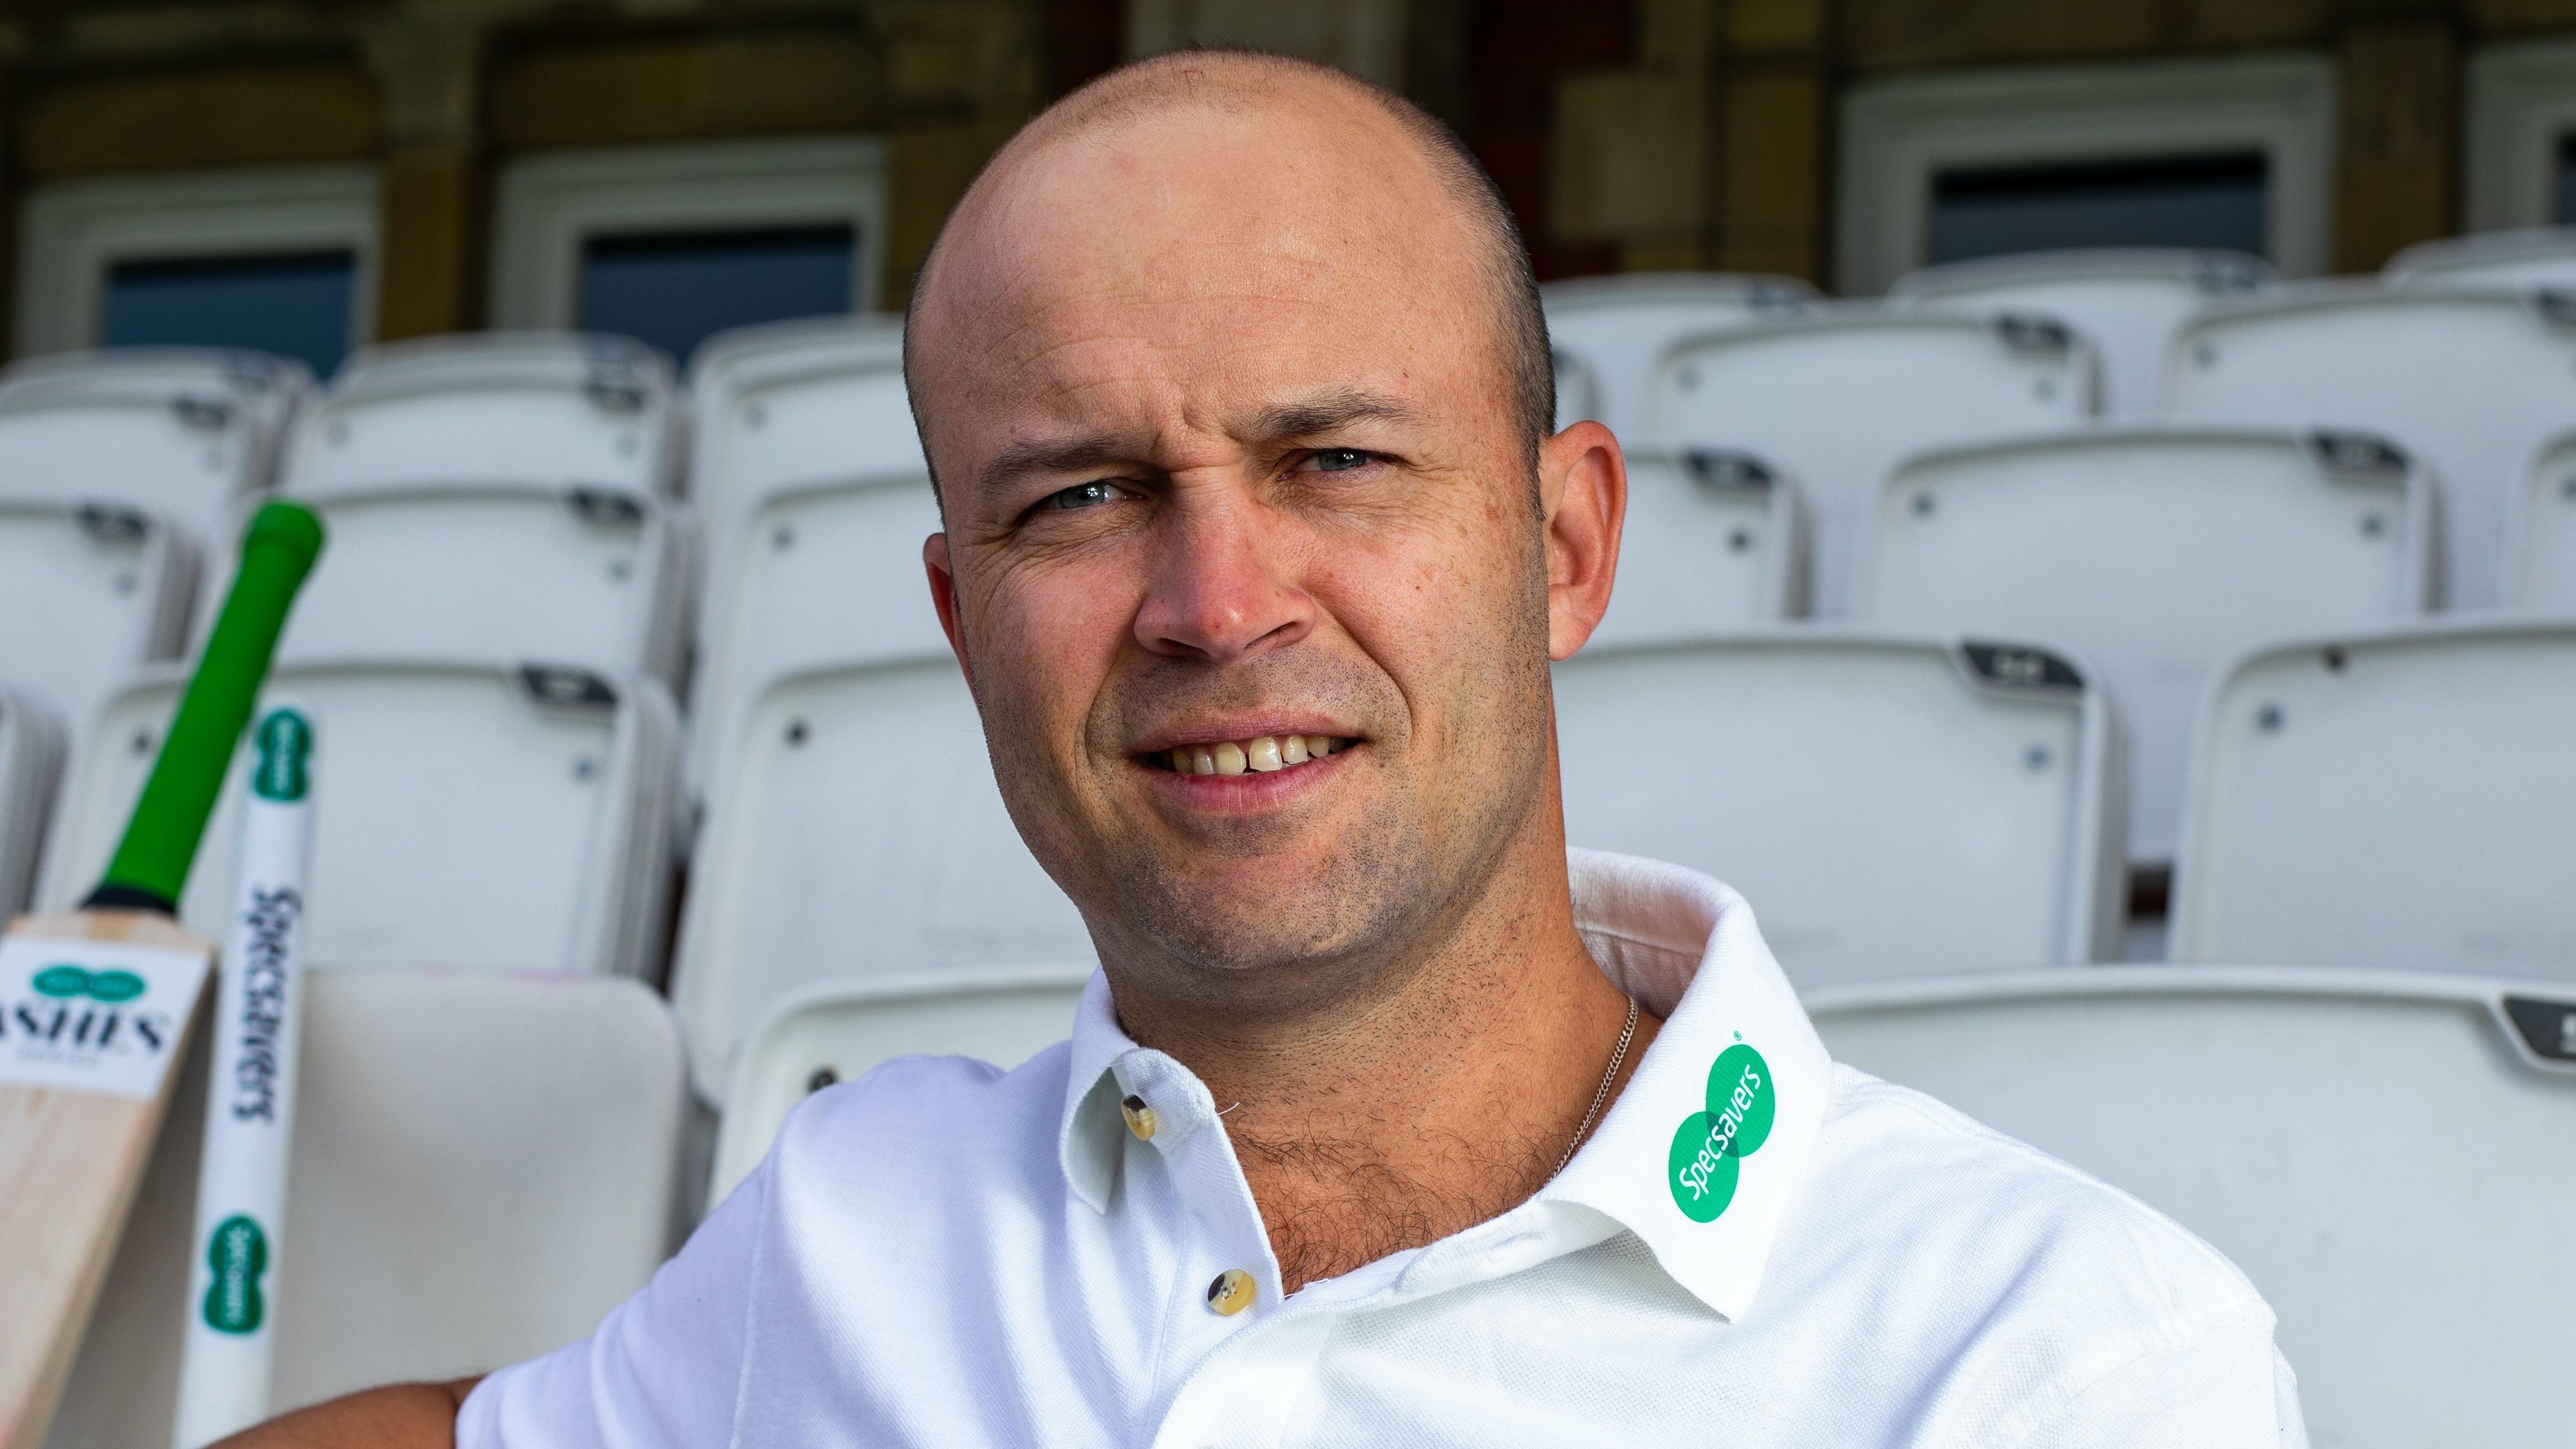 ENG v PAK 2020: Jonathan Trott appointed England's batting coach for Pakistan Tests